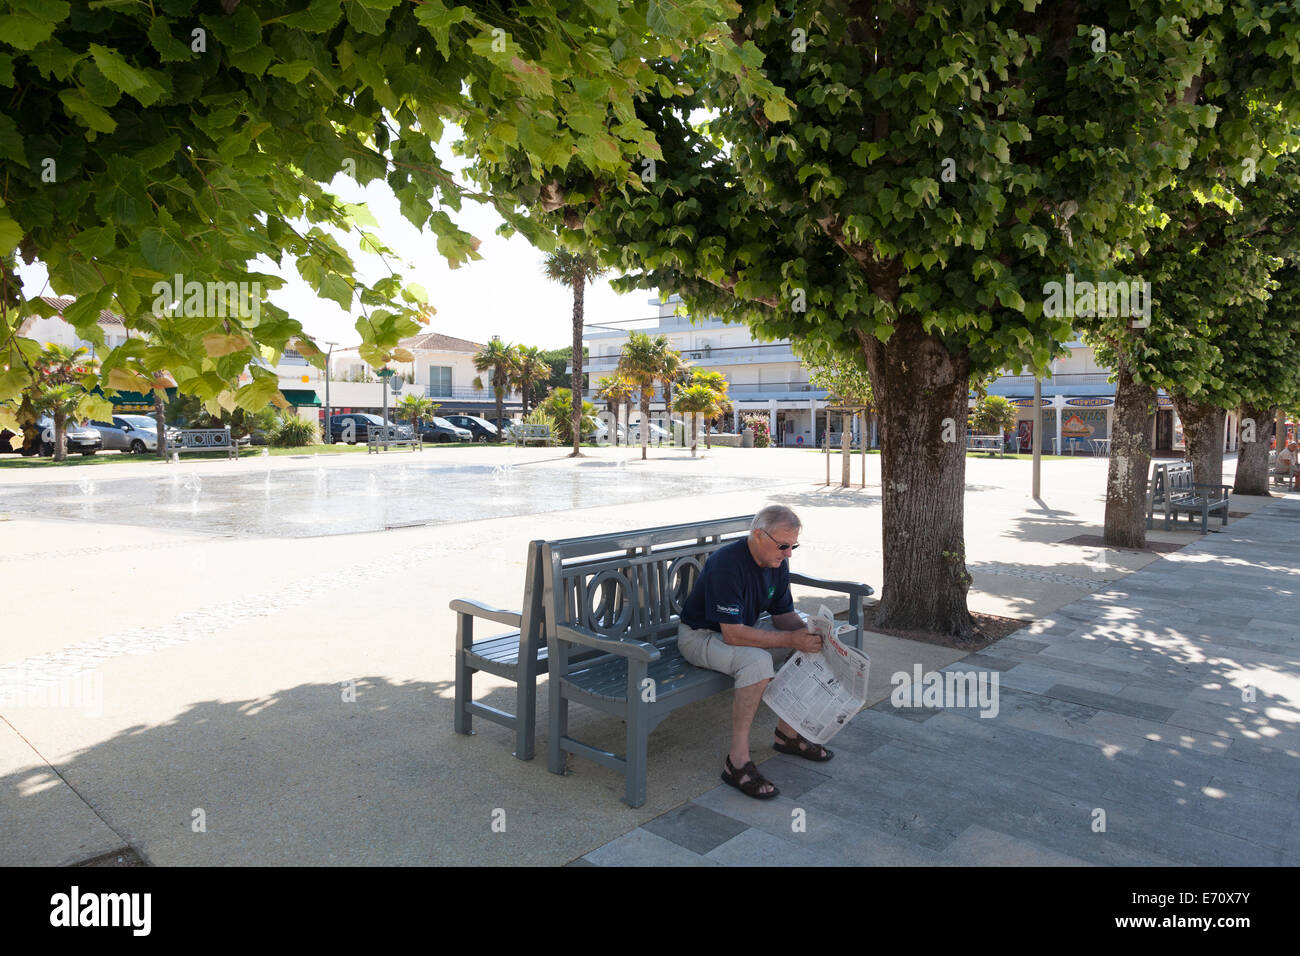 Man reading newspaper sitting on bench under shade of tree in town square. Stock Photo